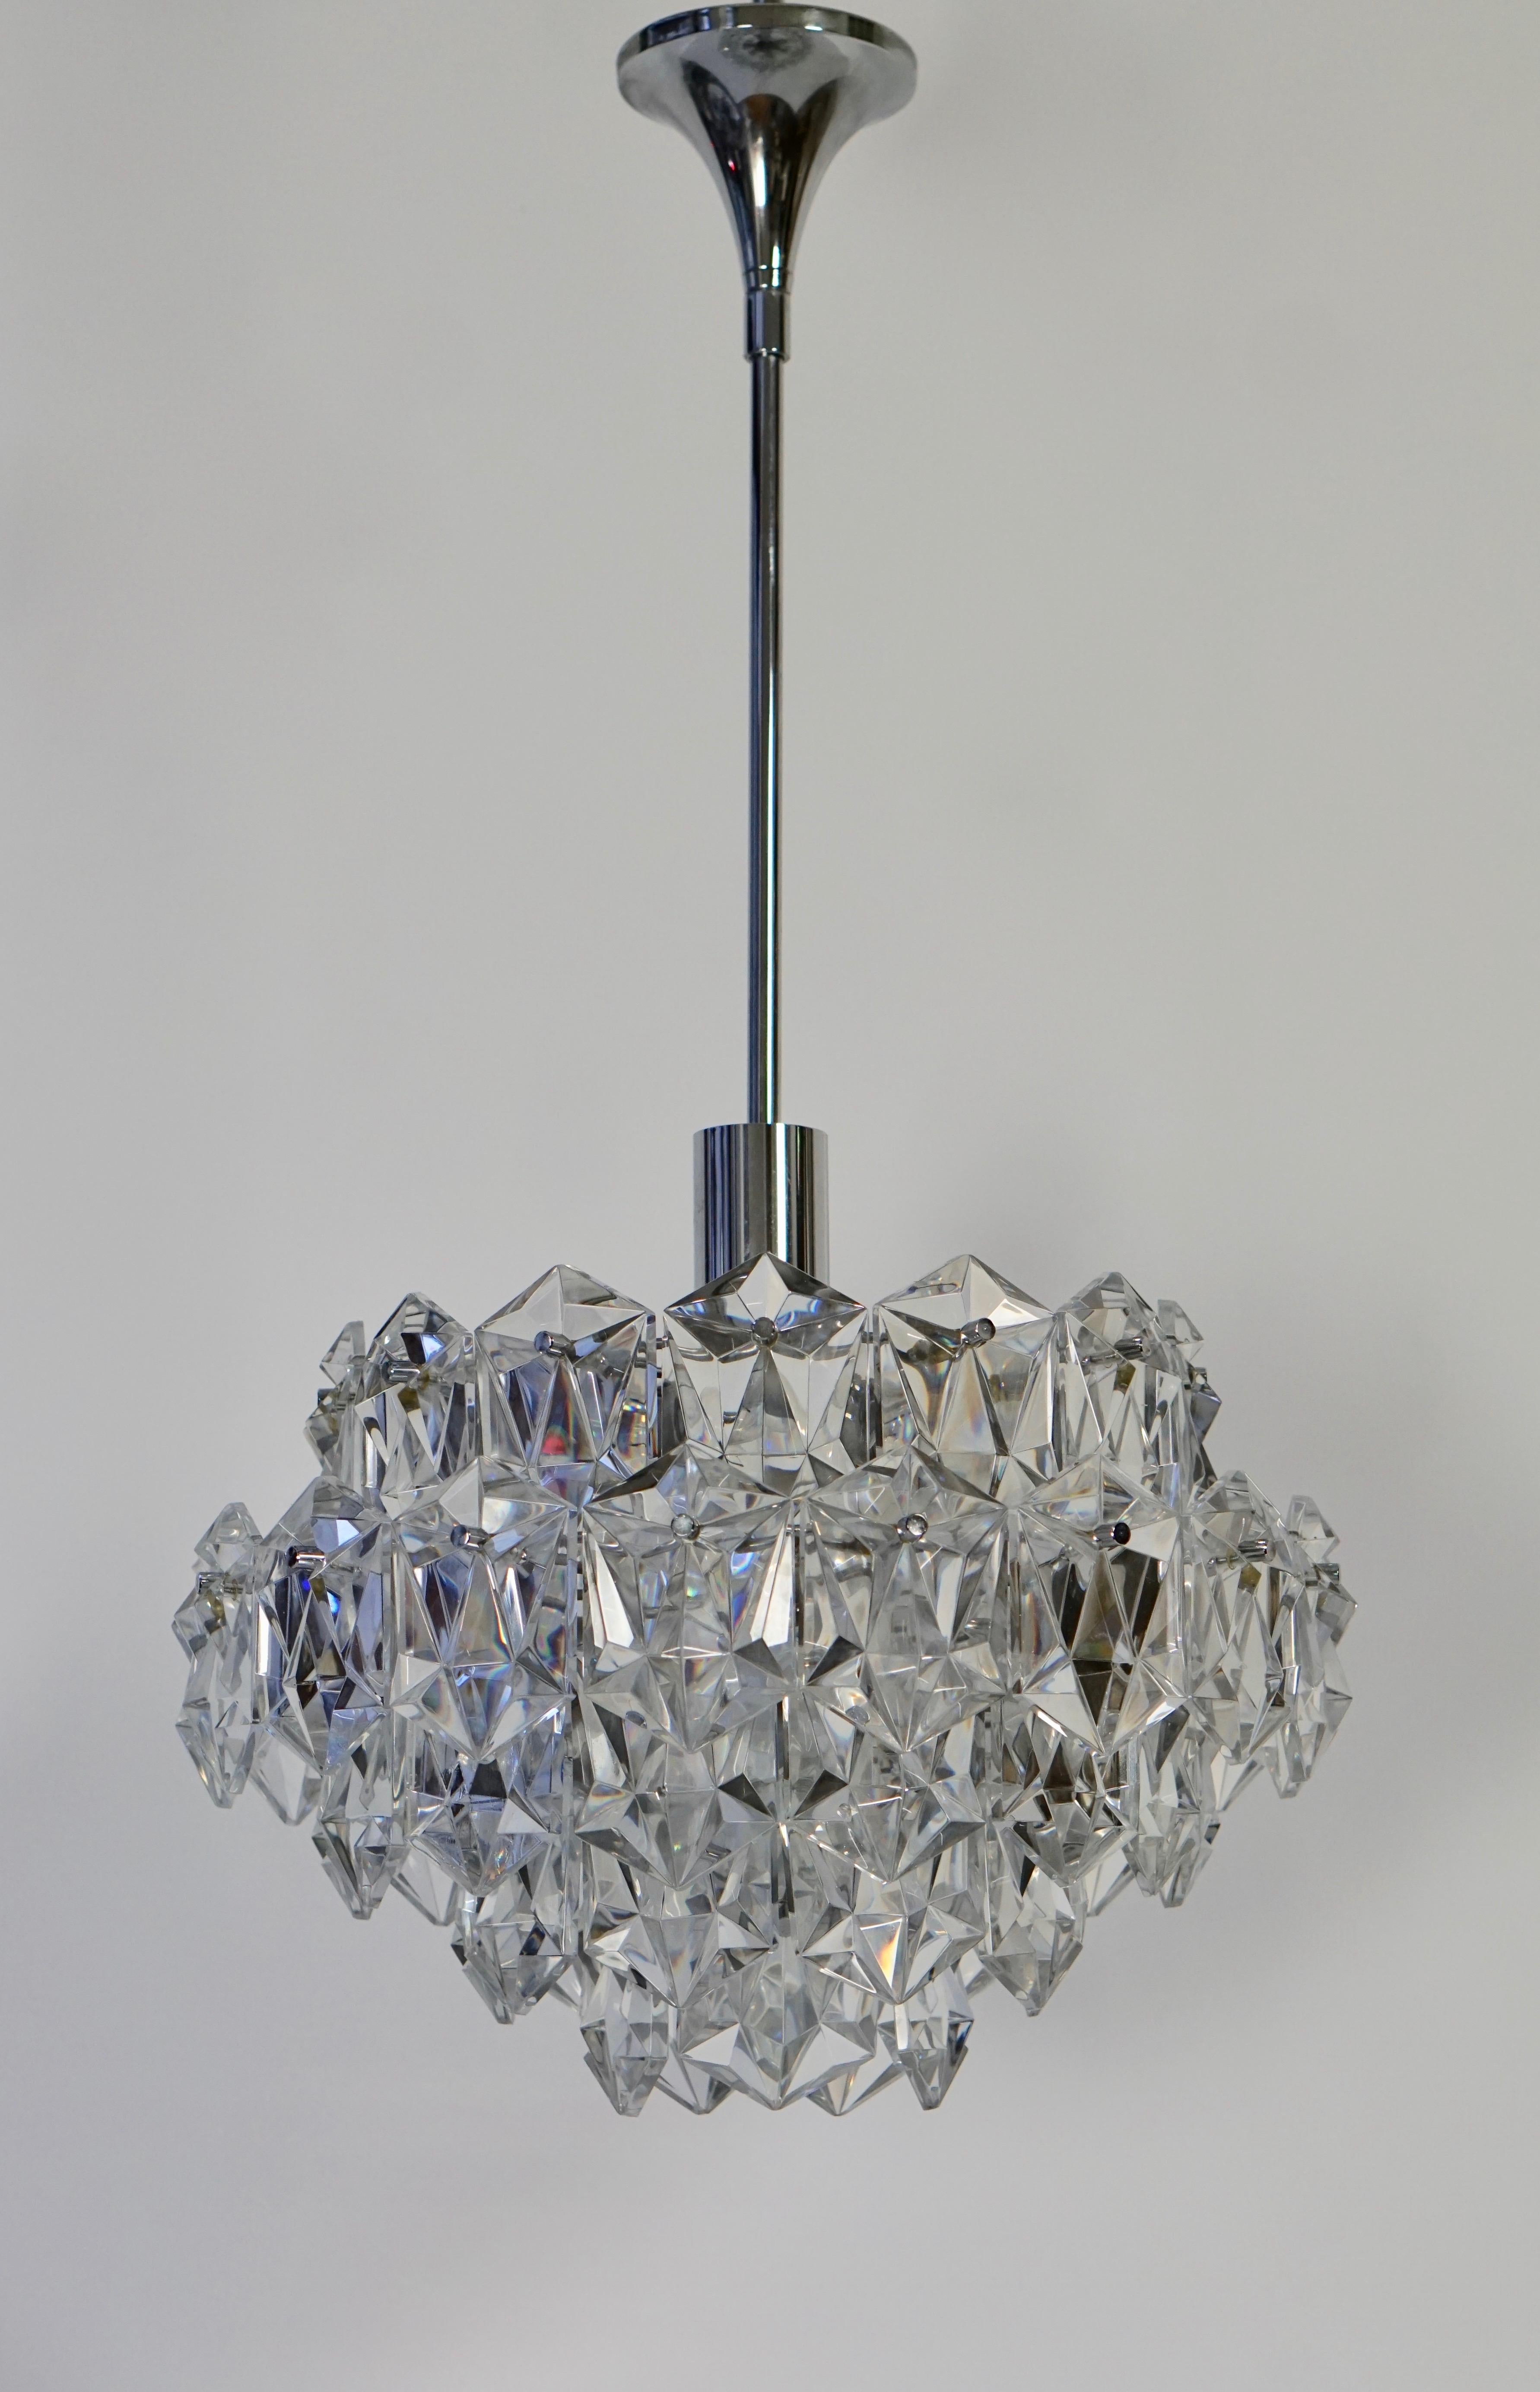 This chandelier has a very unique design, as it is made out of cut crystal glasses, with a unconventional shape whereas the chandelier has a Classic shape itself. The body of the chandelier is held up by a tubular metal pole, which can be connected